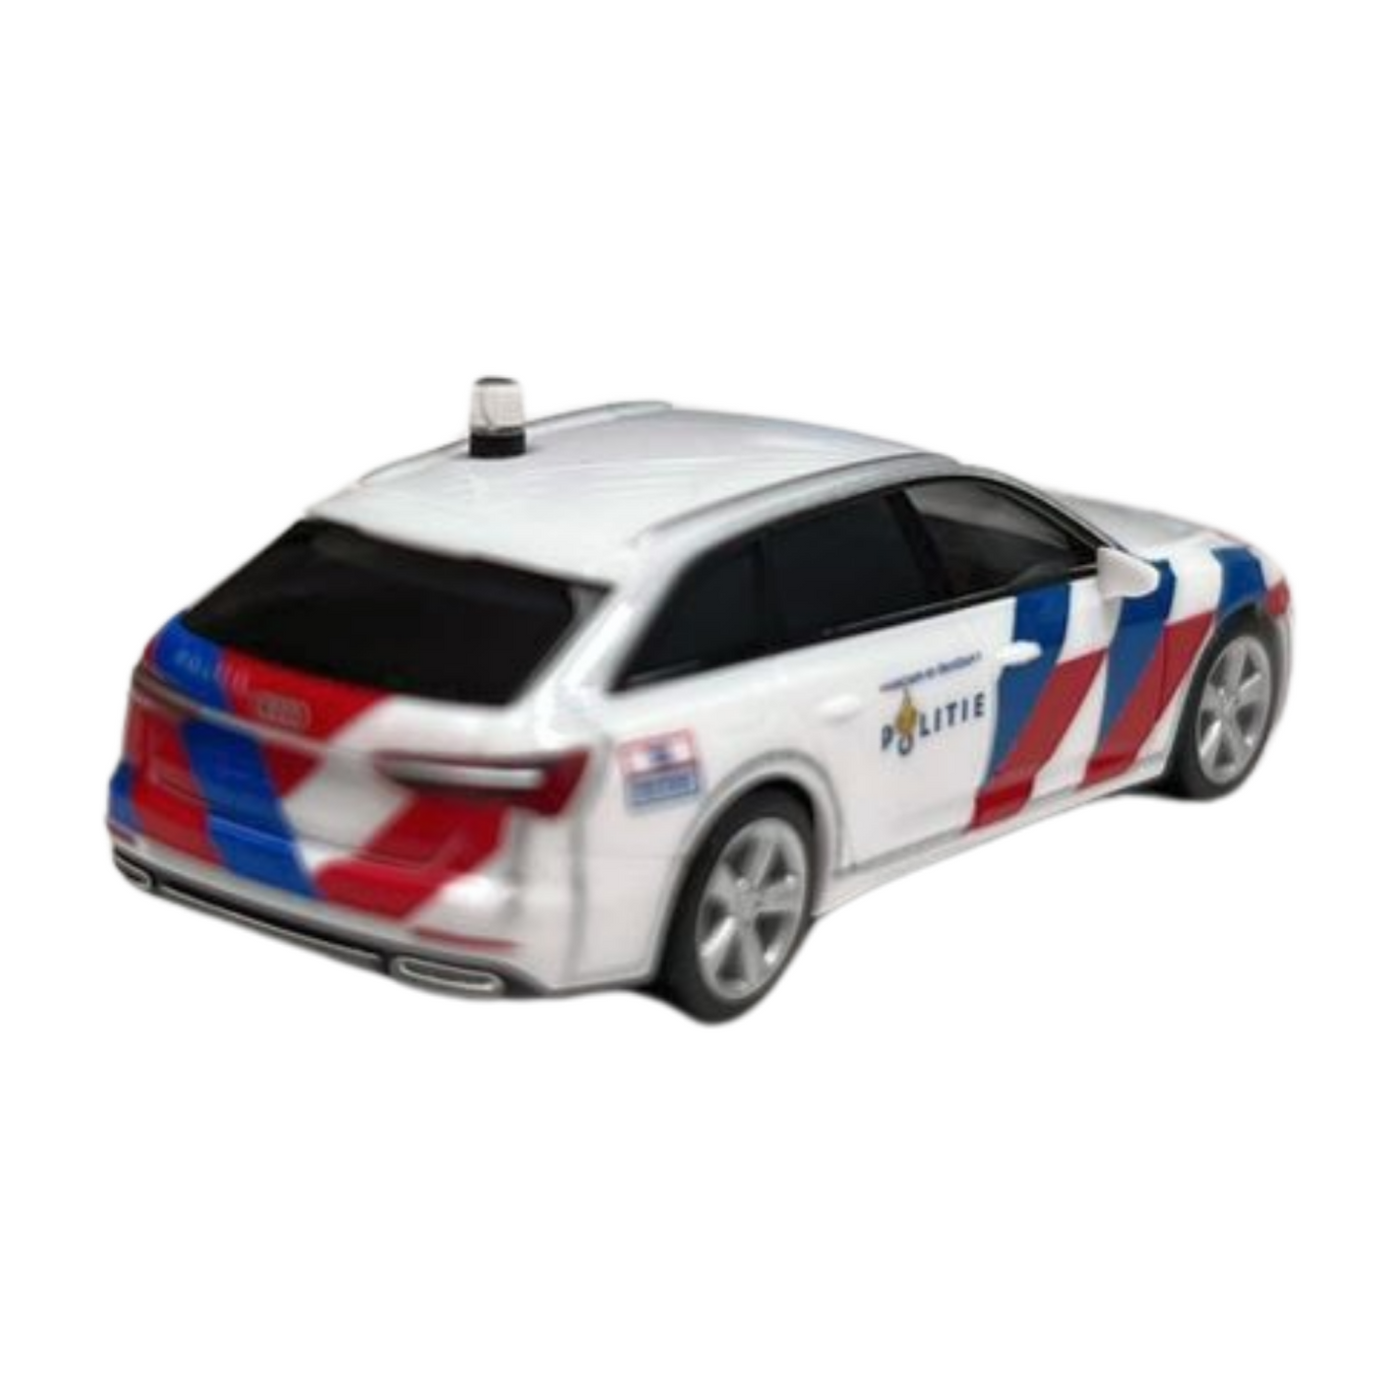 Herpa Police Cars: Services on Dutch Wheels!